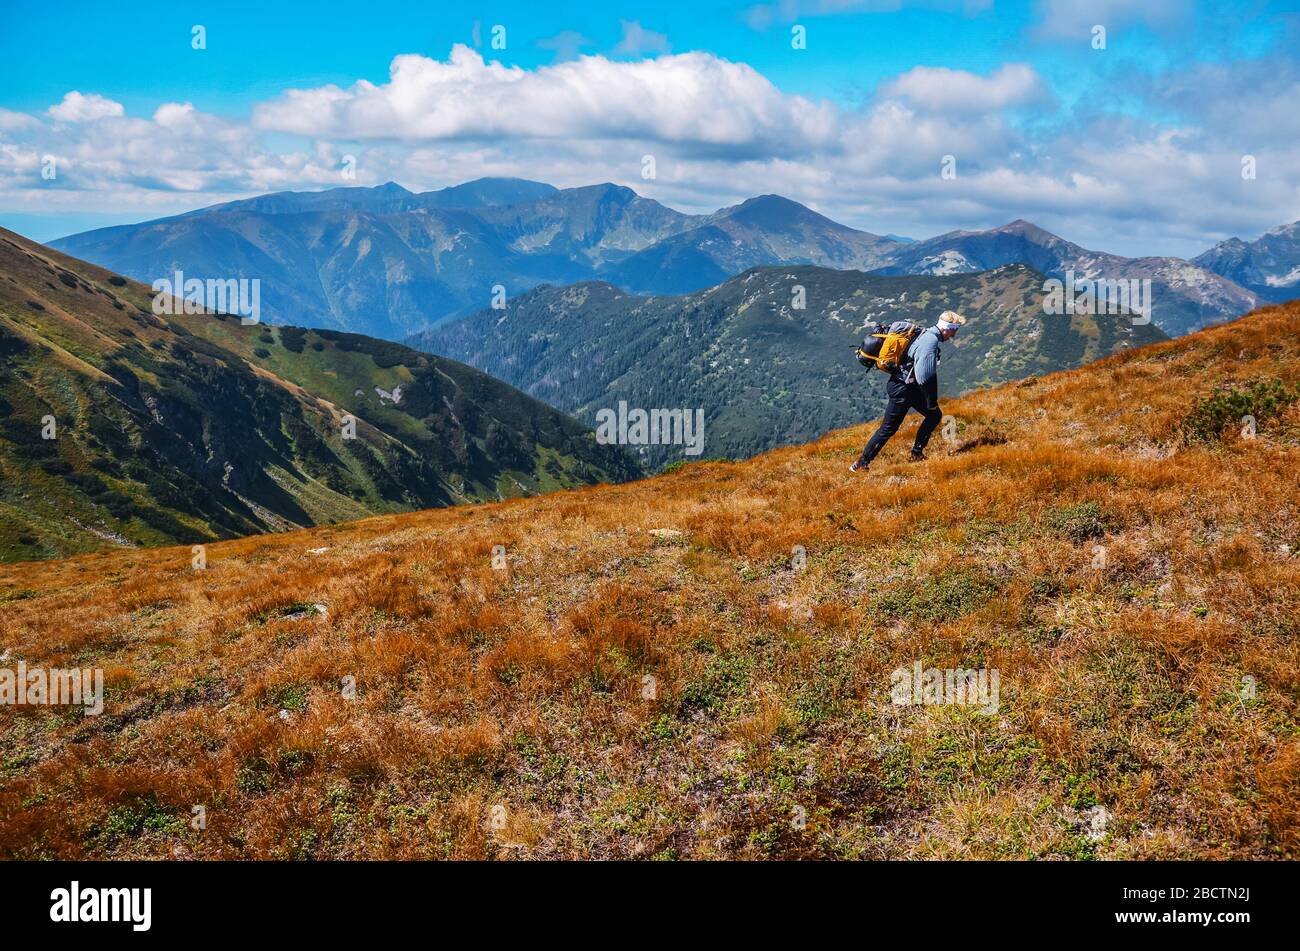 Trail runner on mountains meadow. Beautiful hills in background. Scenery, adventure, athletics sport concept photo Stock Photo